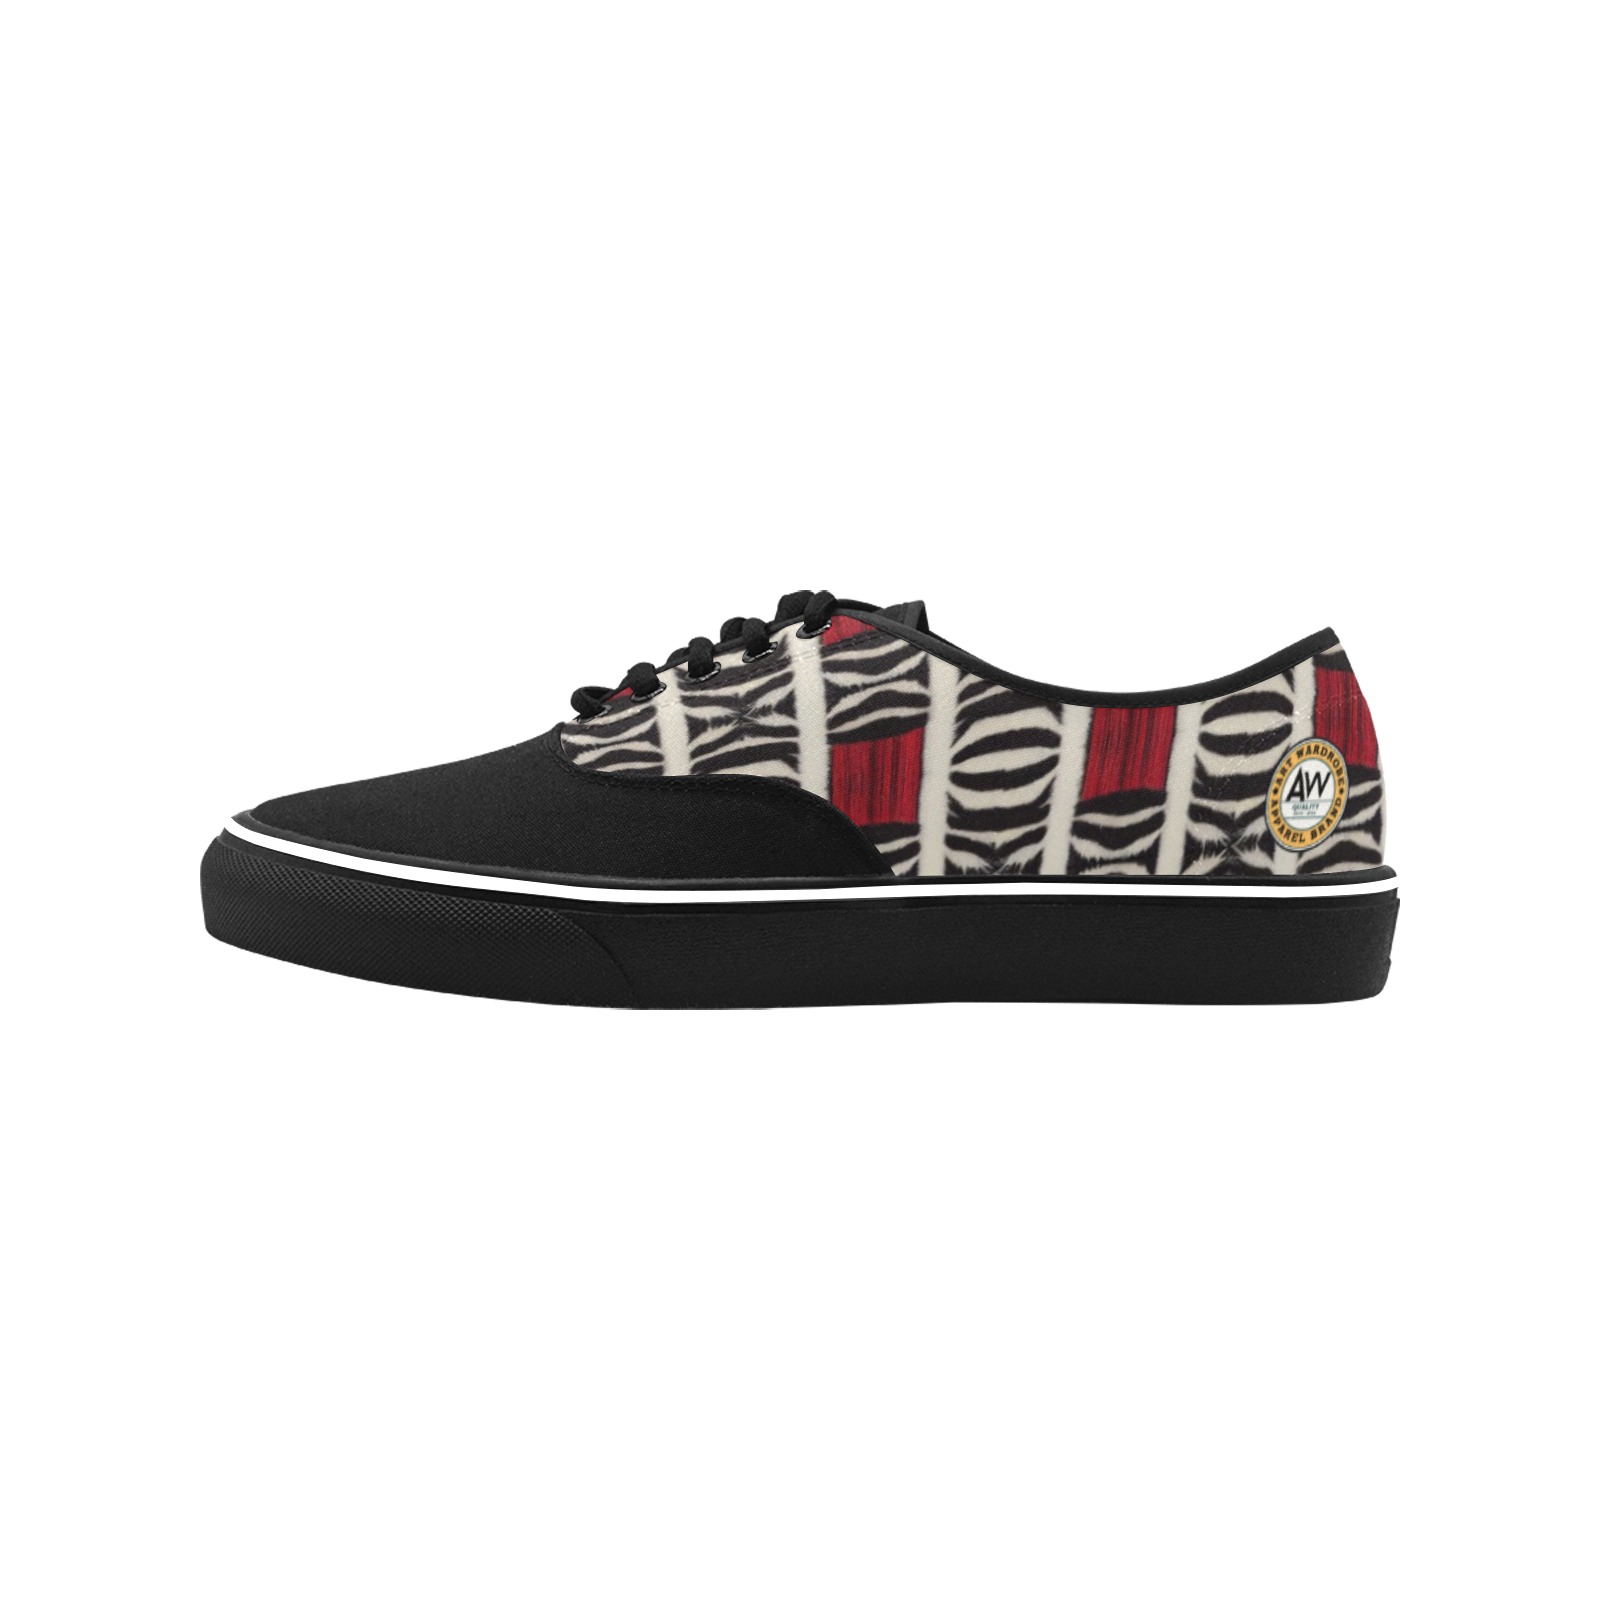 black, red and white zebra print Classic Men's Canvas Low Top Shoes (Model E001-4)